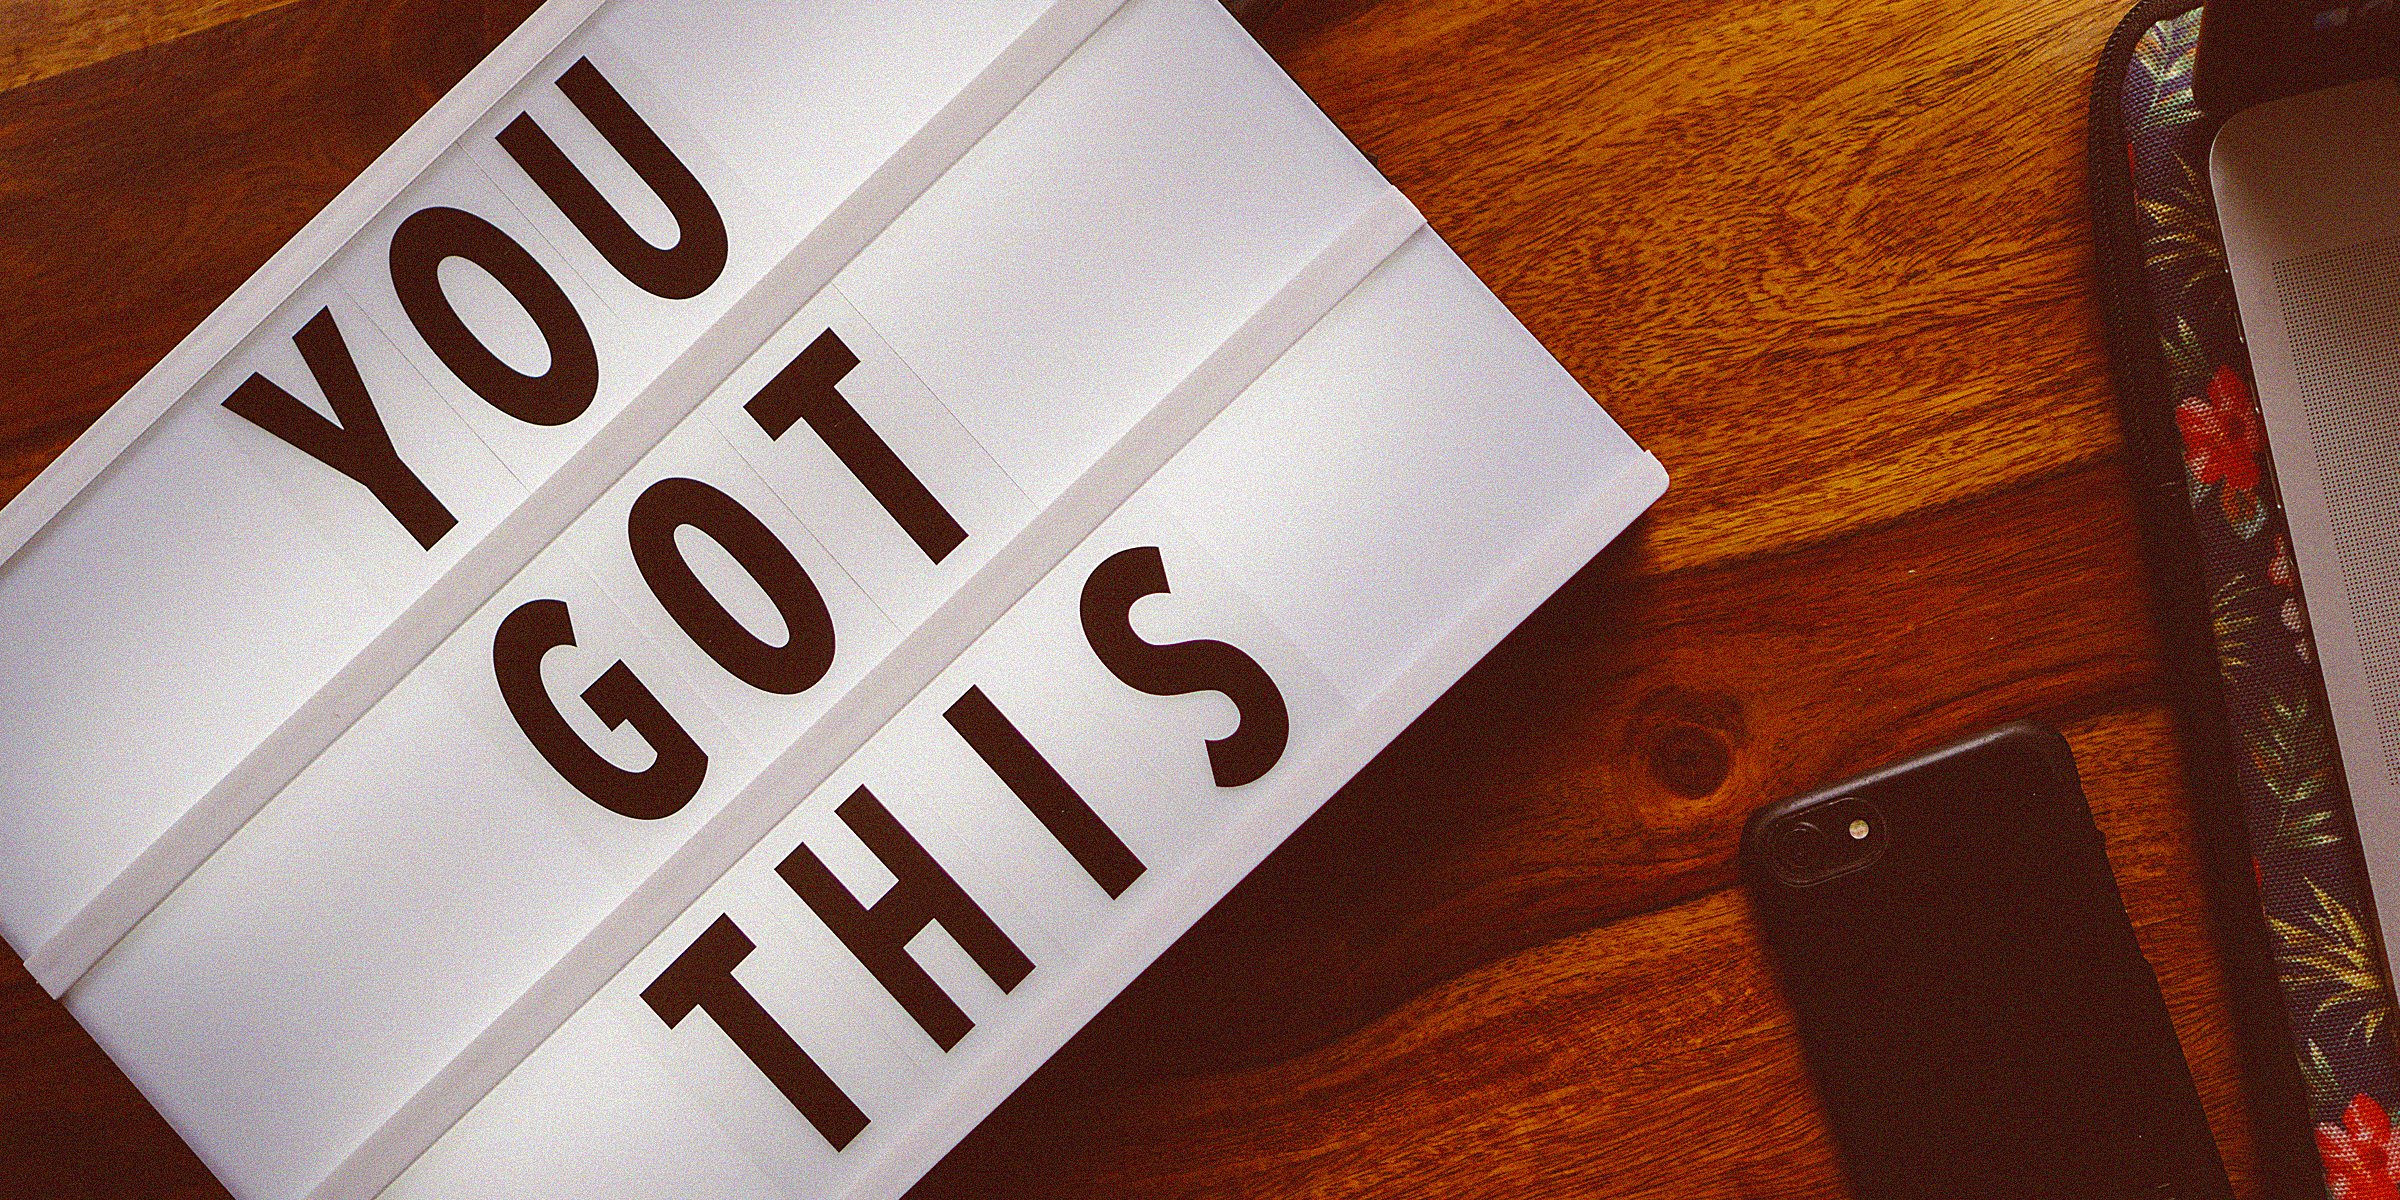 Unsplash | A white board on a table complete with the words "You got this" alongside a phone  and another unidentifiable object